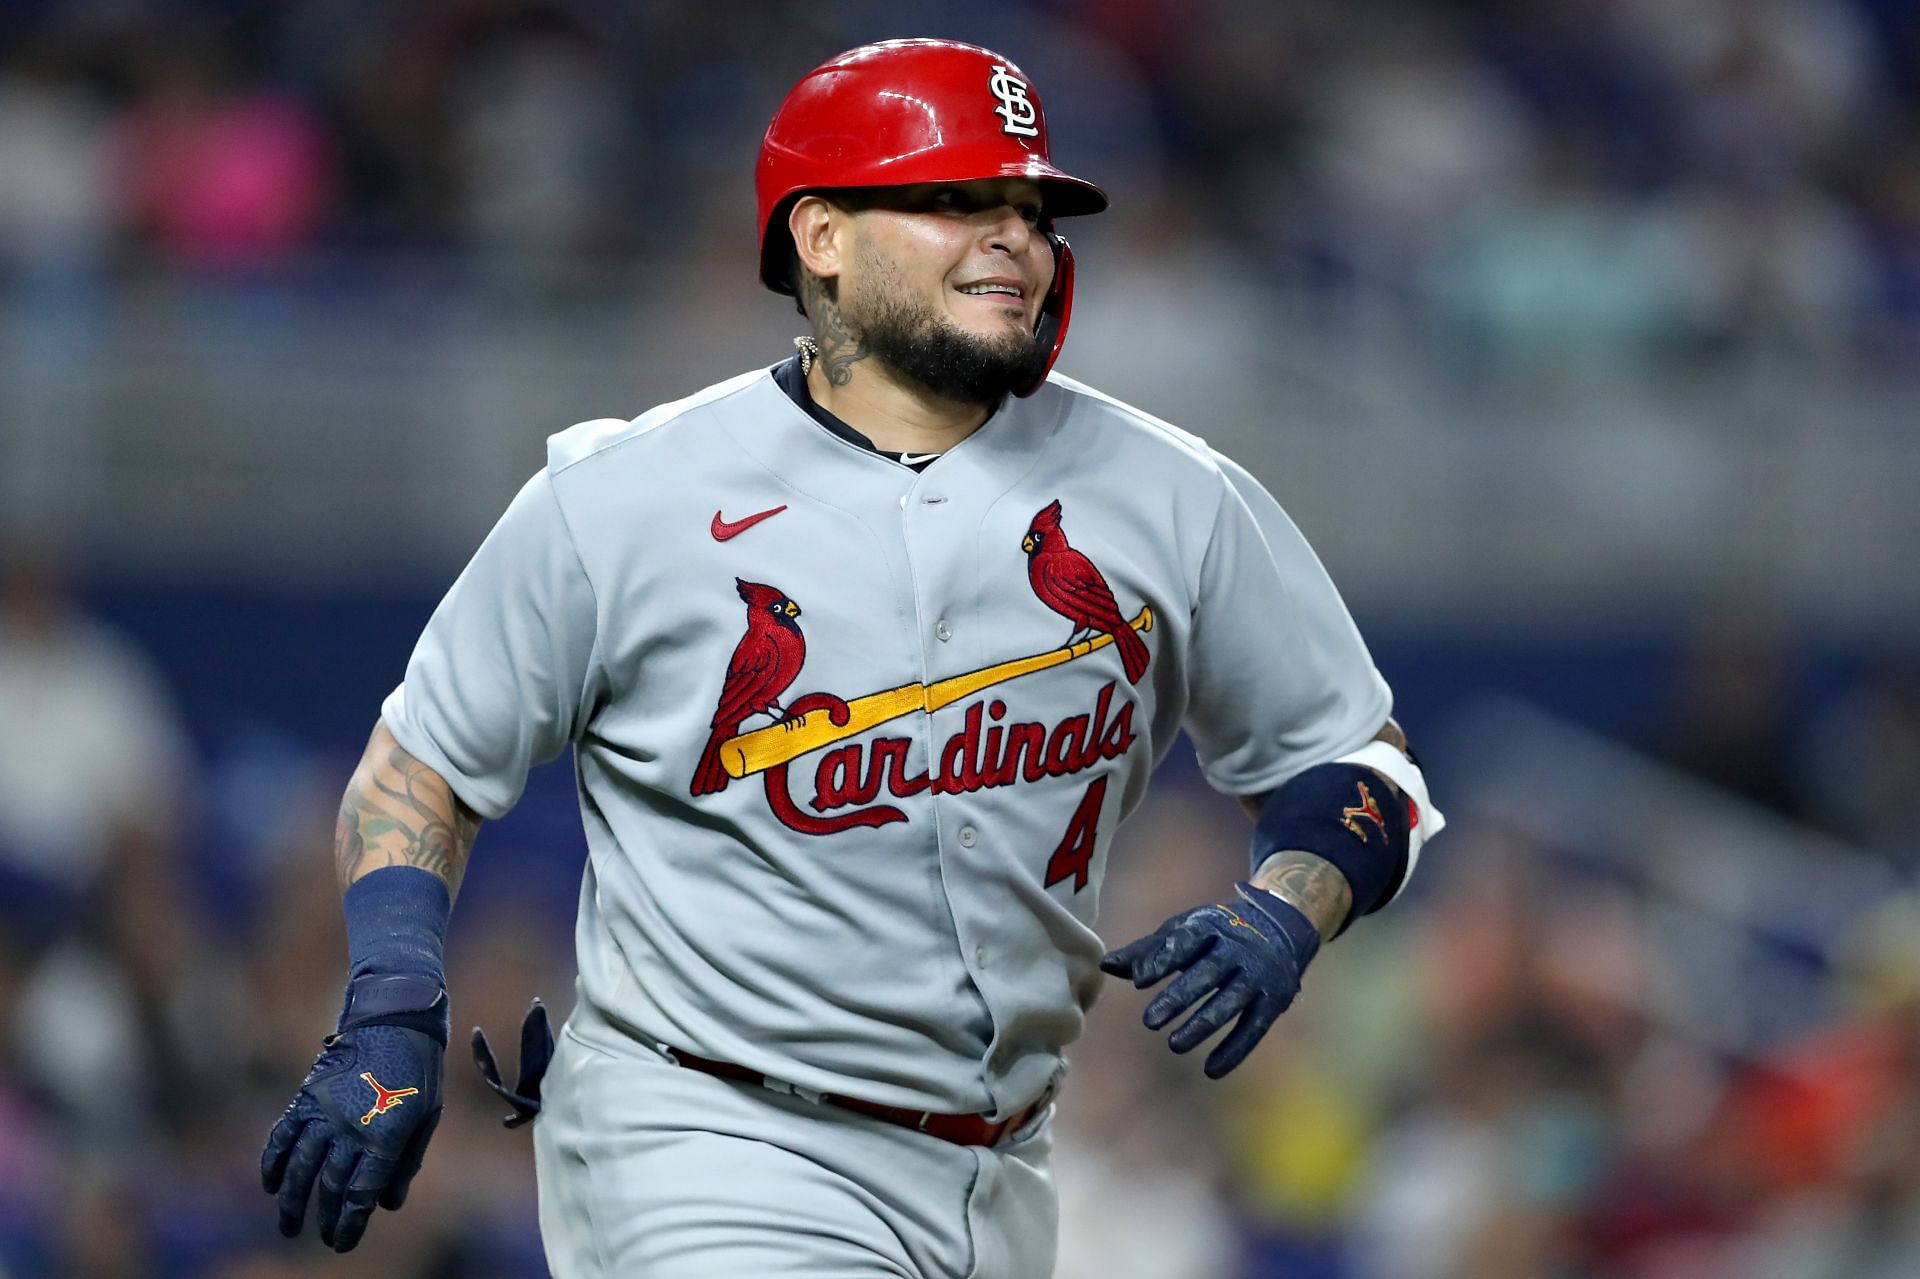 Yadier Molina runs to first base after he lines a base hit into right field. 